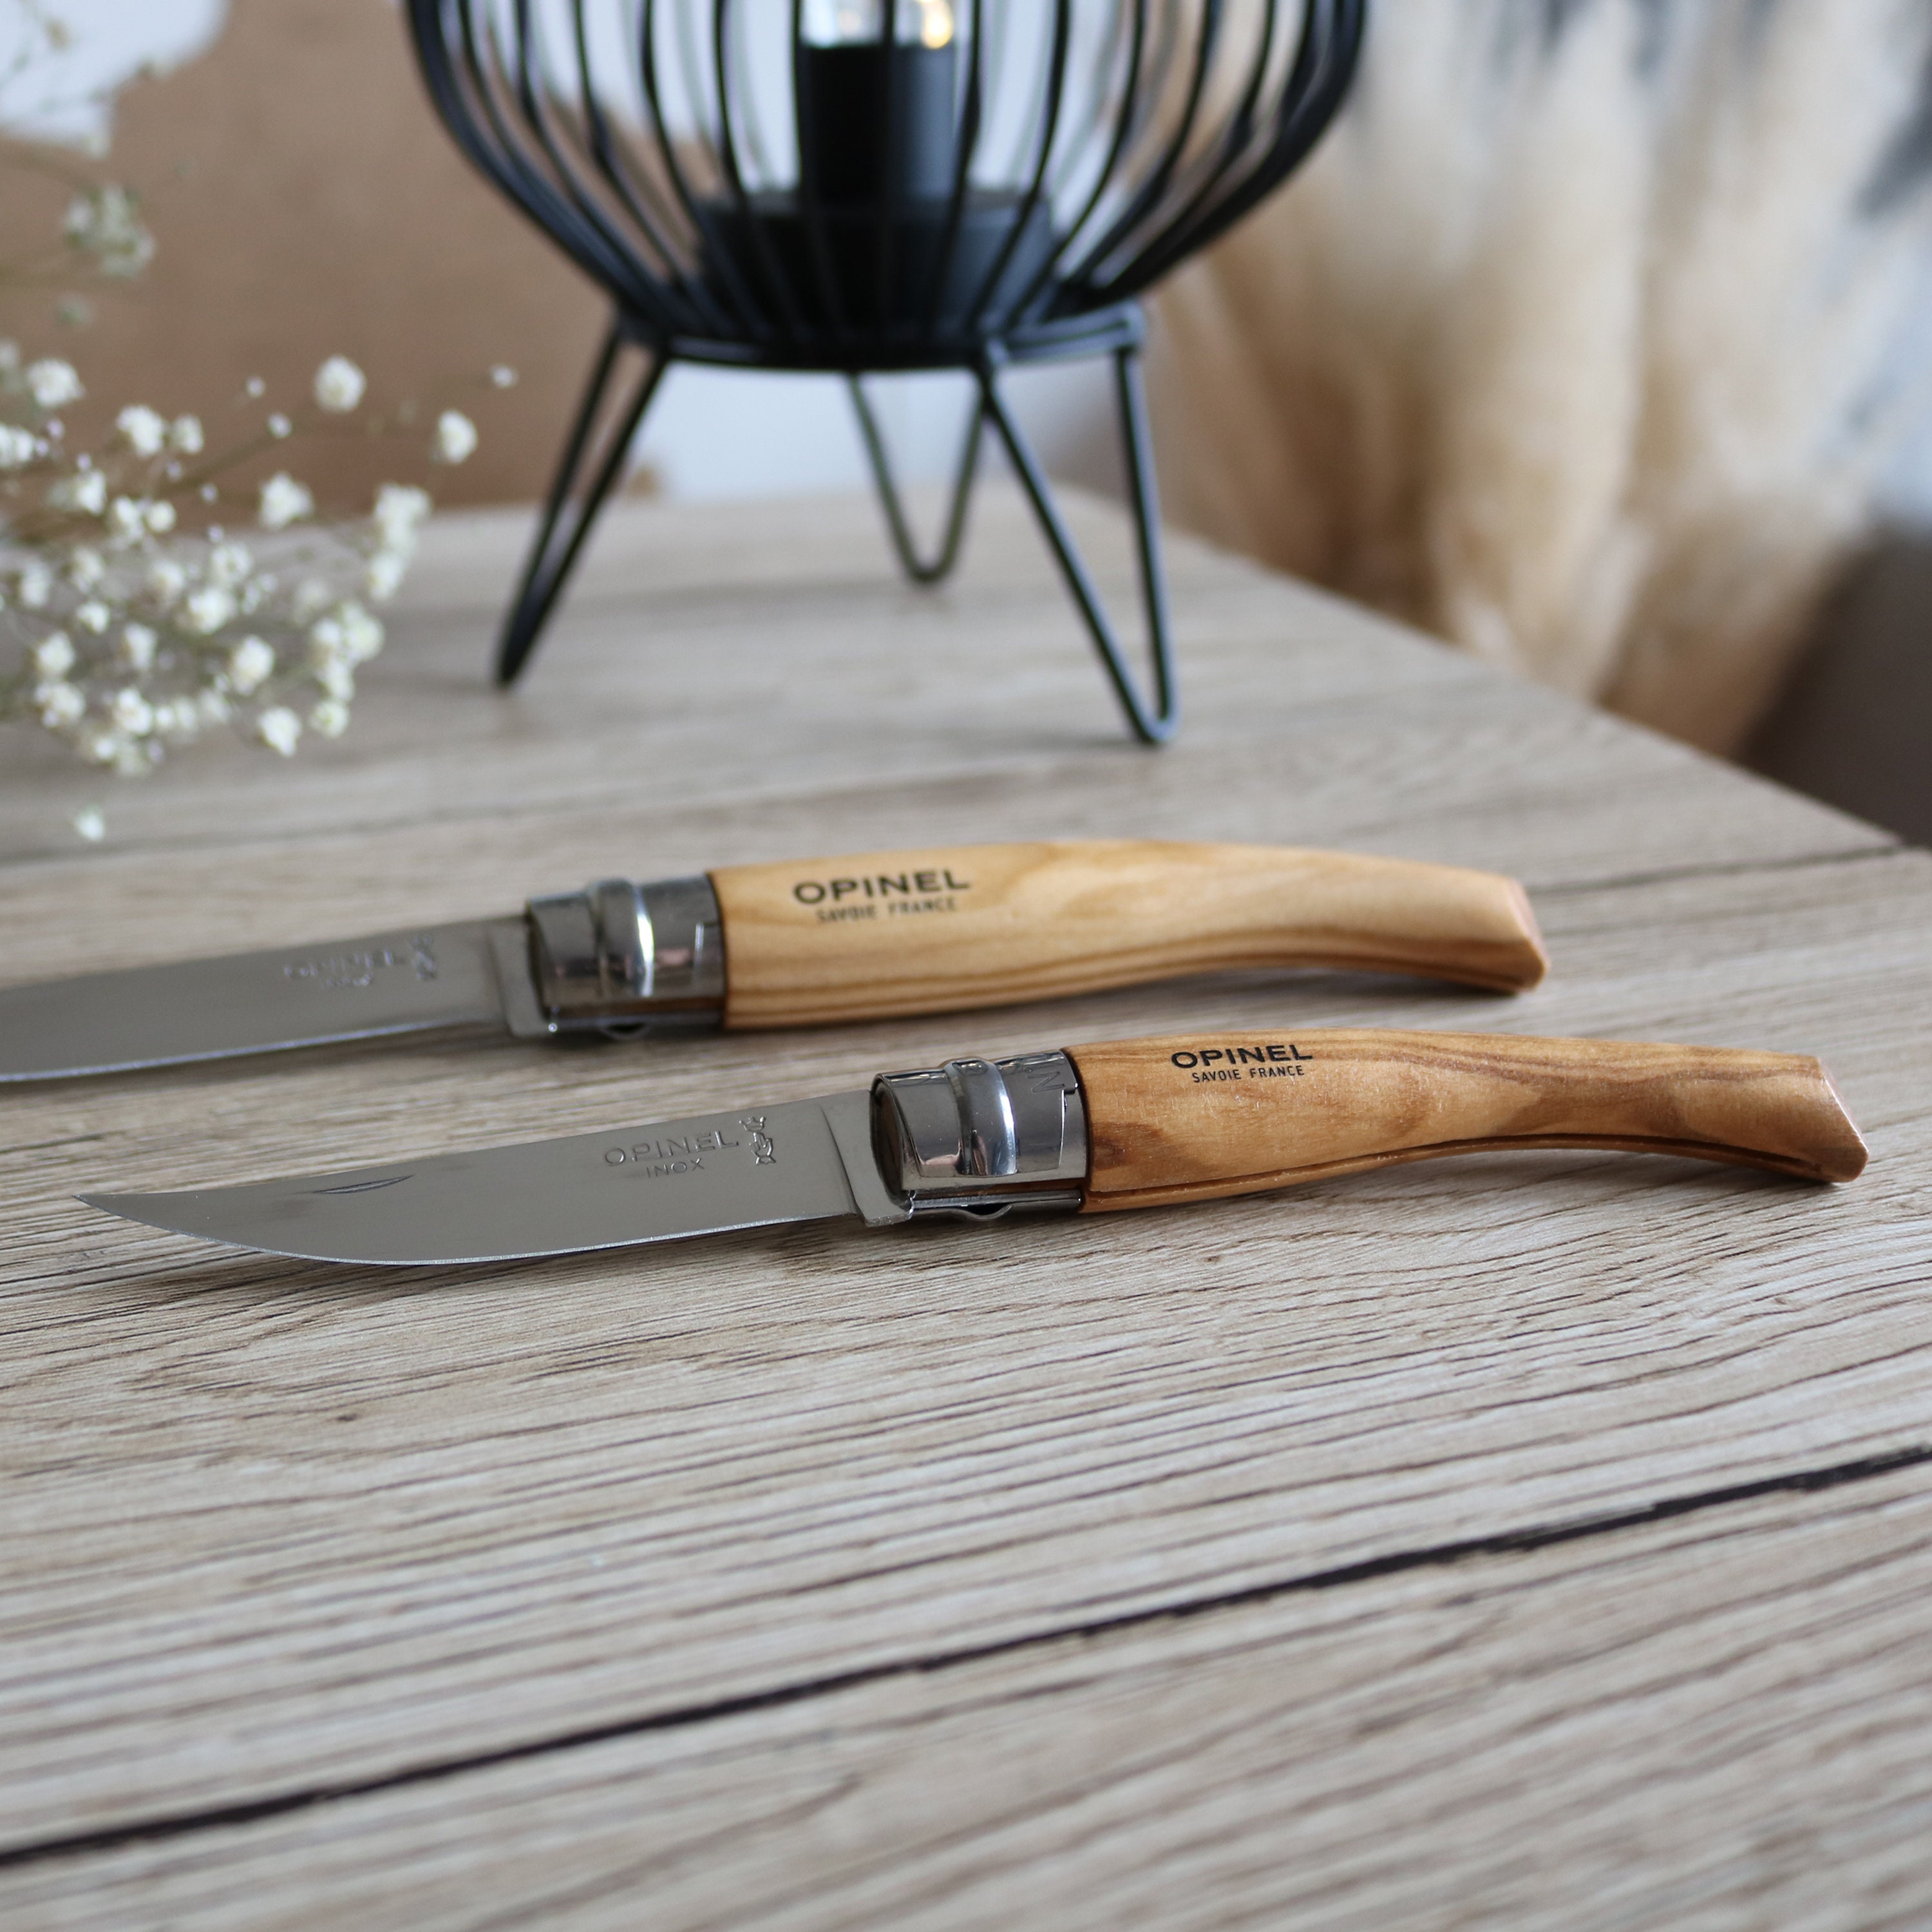 OPINEL NO. 8 KNIFE - STAINLESS STEEL - PURCHASE OF KITCHEN UTENSILS